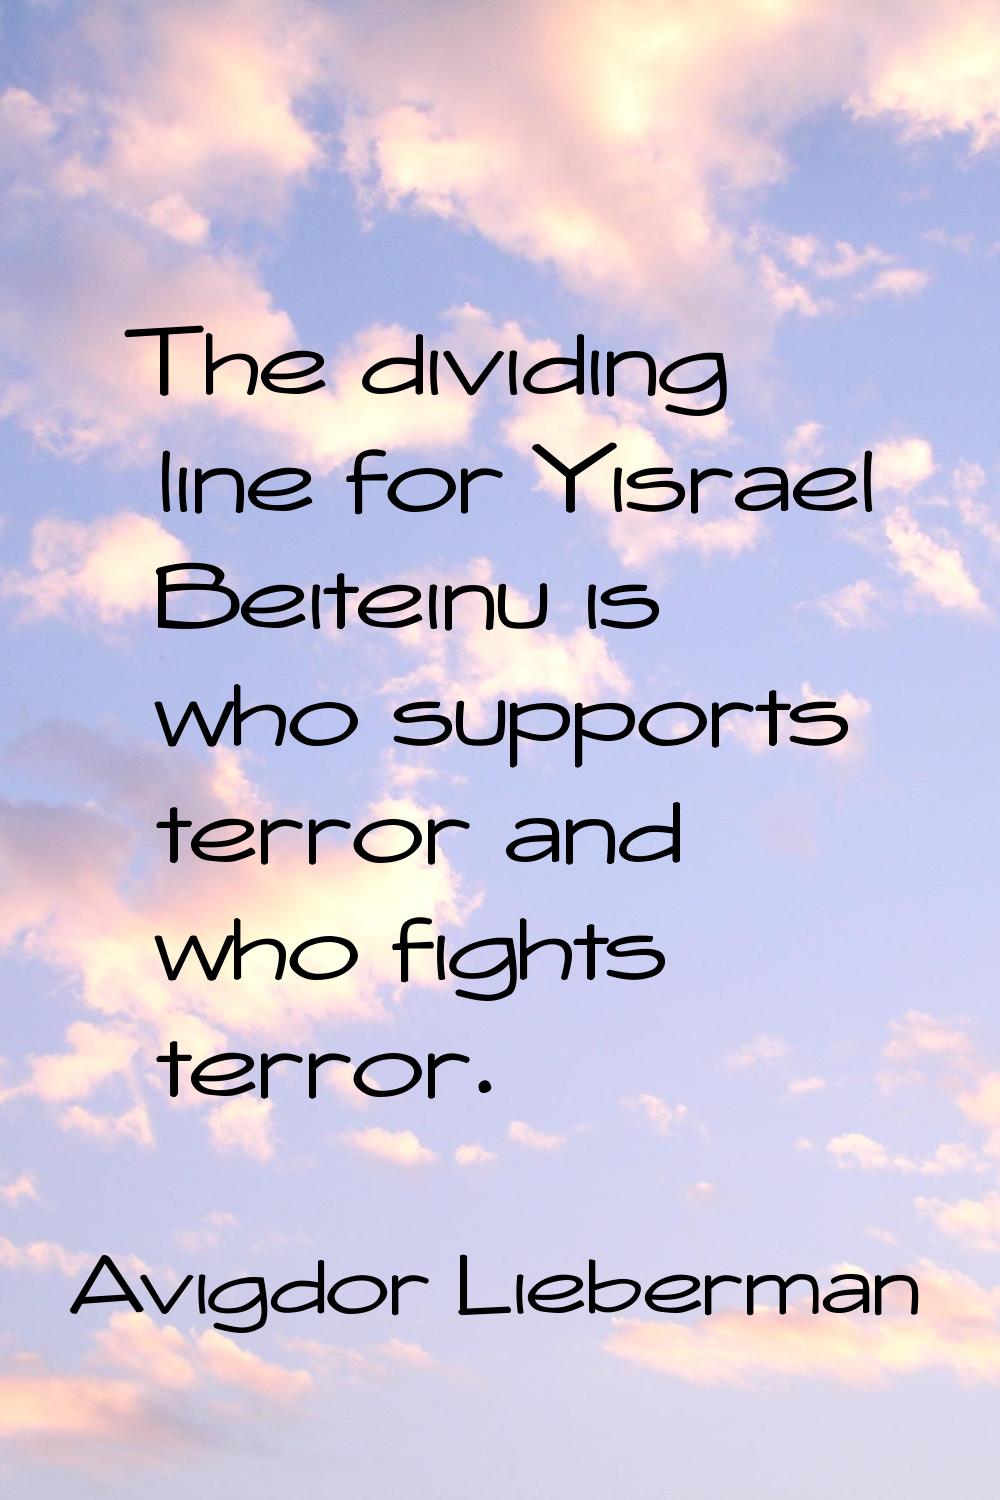 The dividing line for Yisrael Beiteinu is who supports terror and who fights terror.